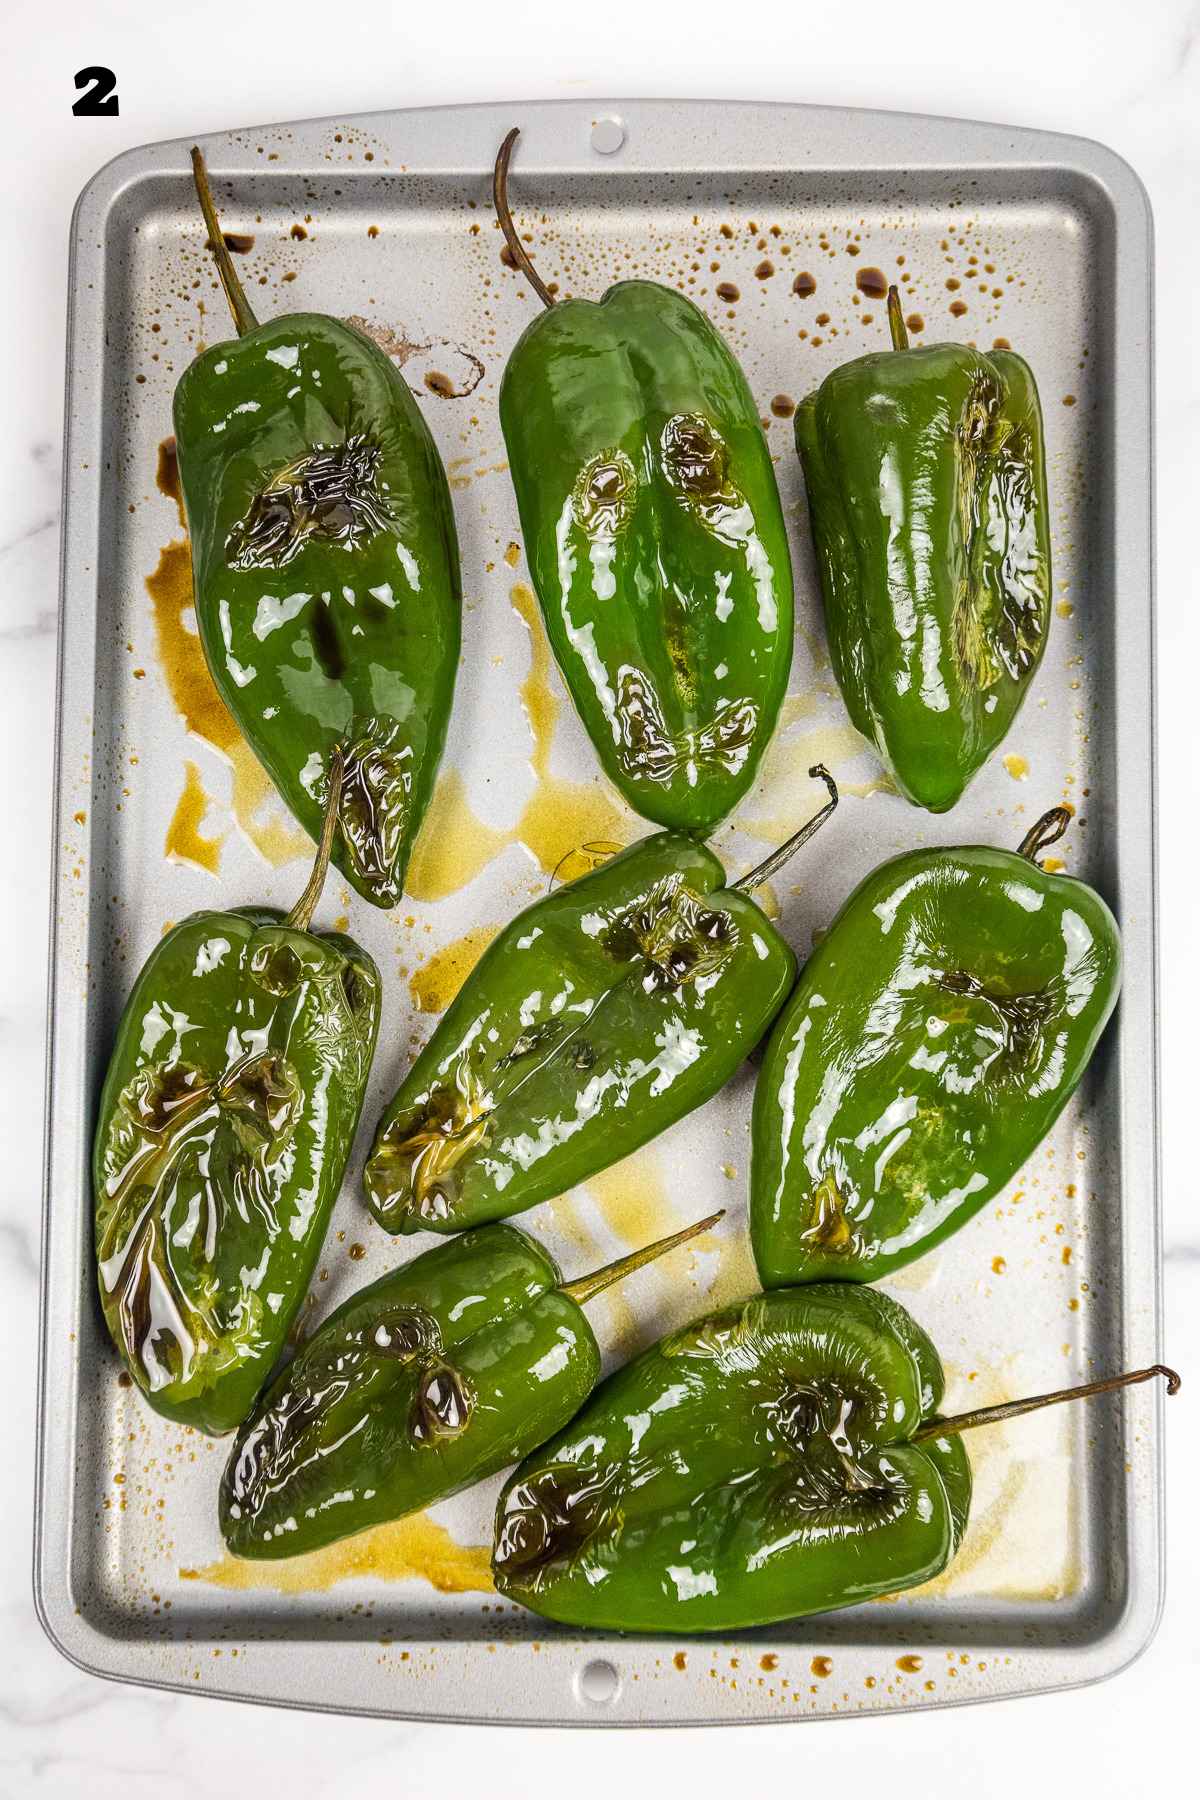 Charred pasilla peppers on a baking sheet.